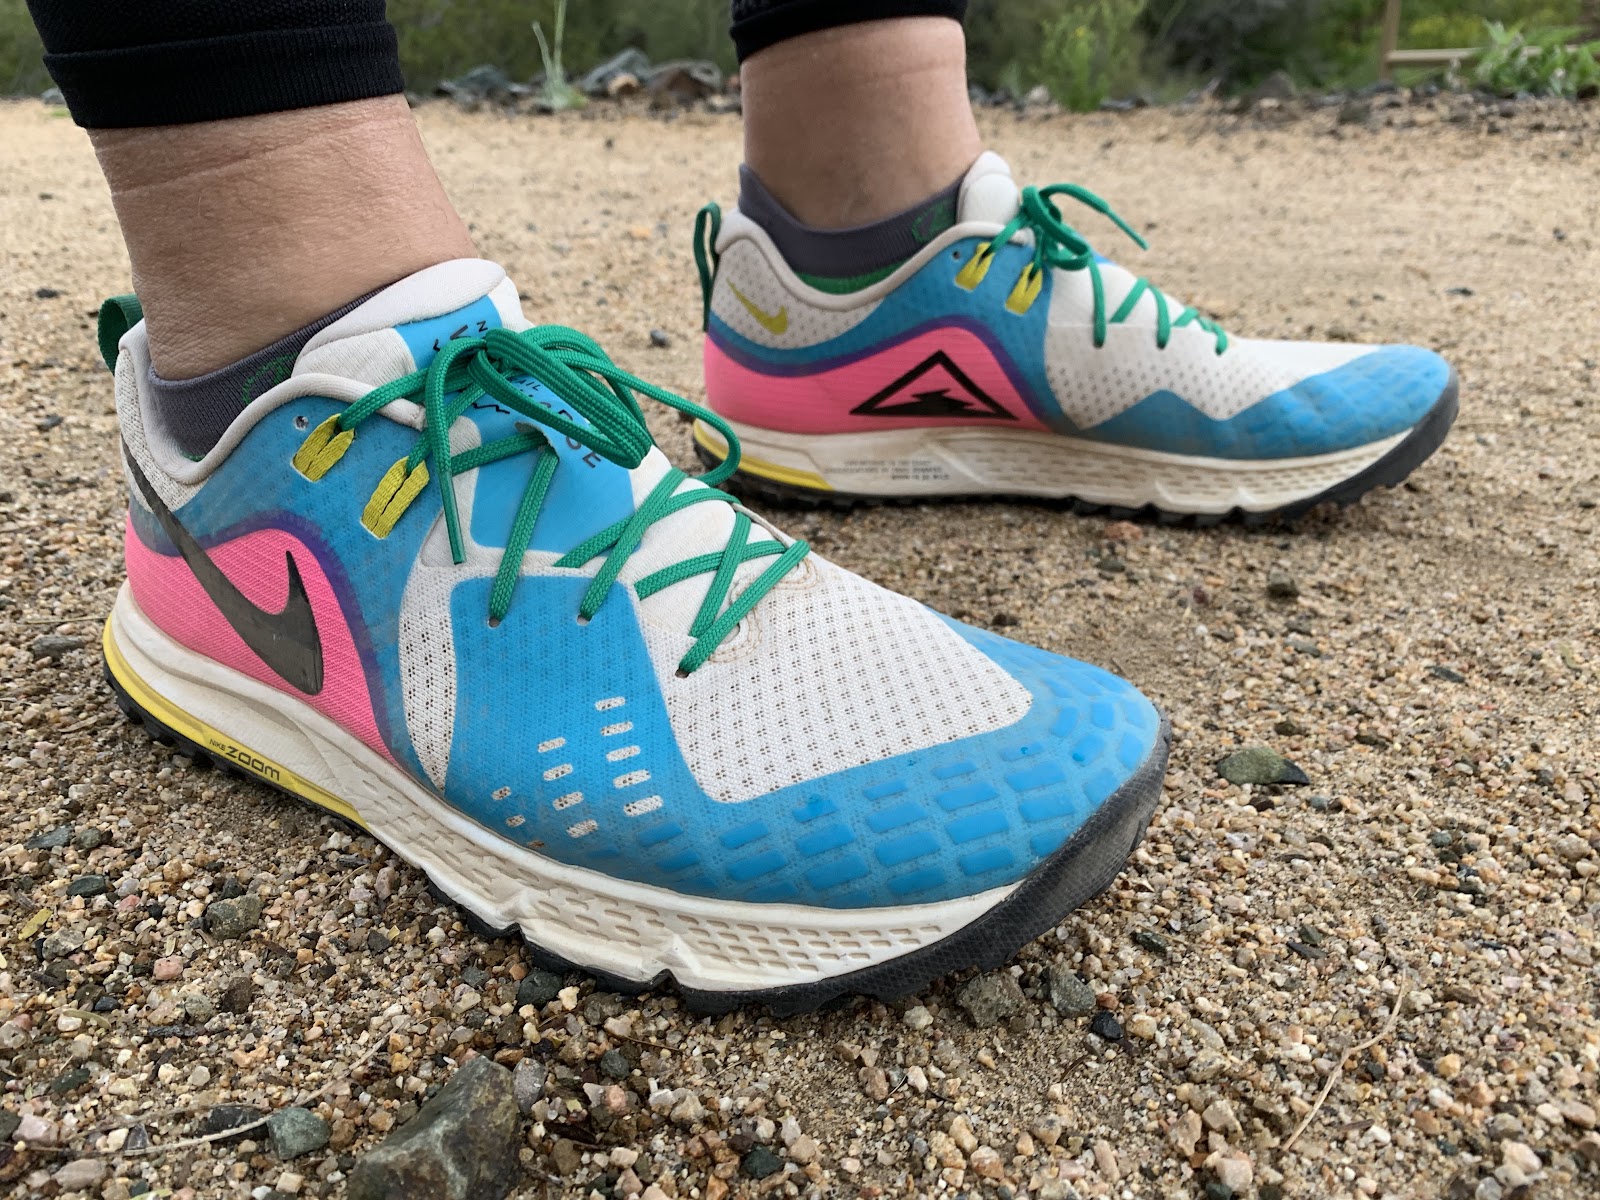 detalles repentinamente Helecho Road Trail Run: Nike Air Zoom Wildhorse 5 Review - Finally a new Wildhorse,  but mostly the same Wildhorse